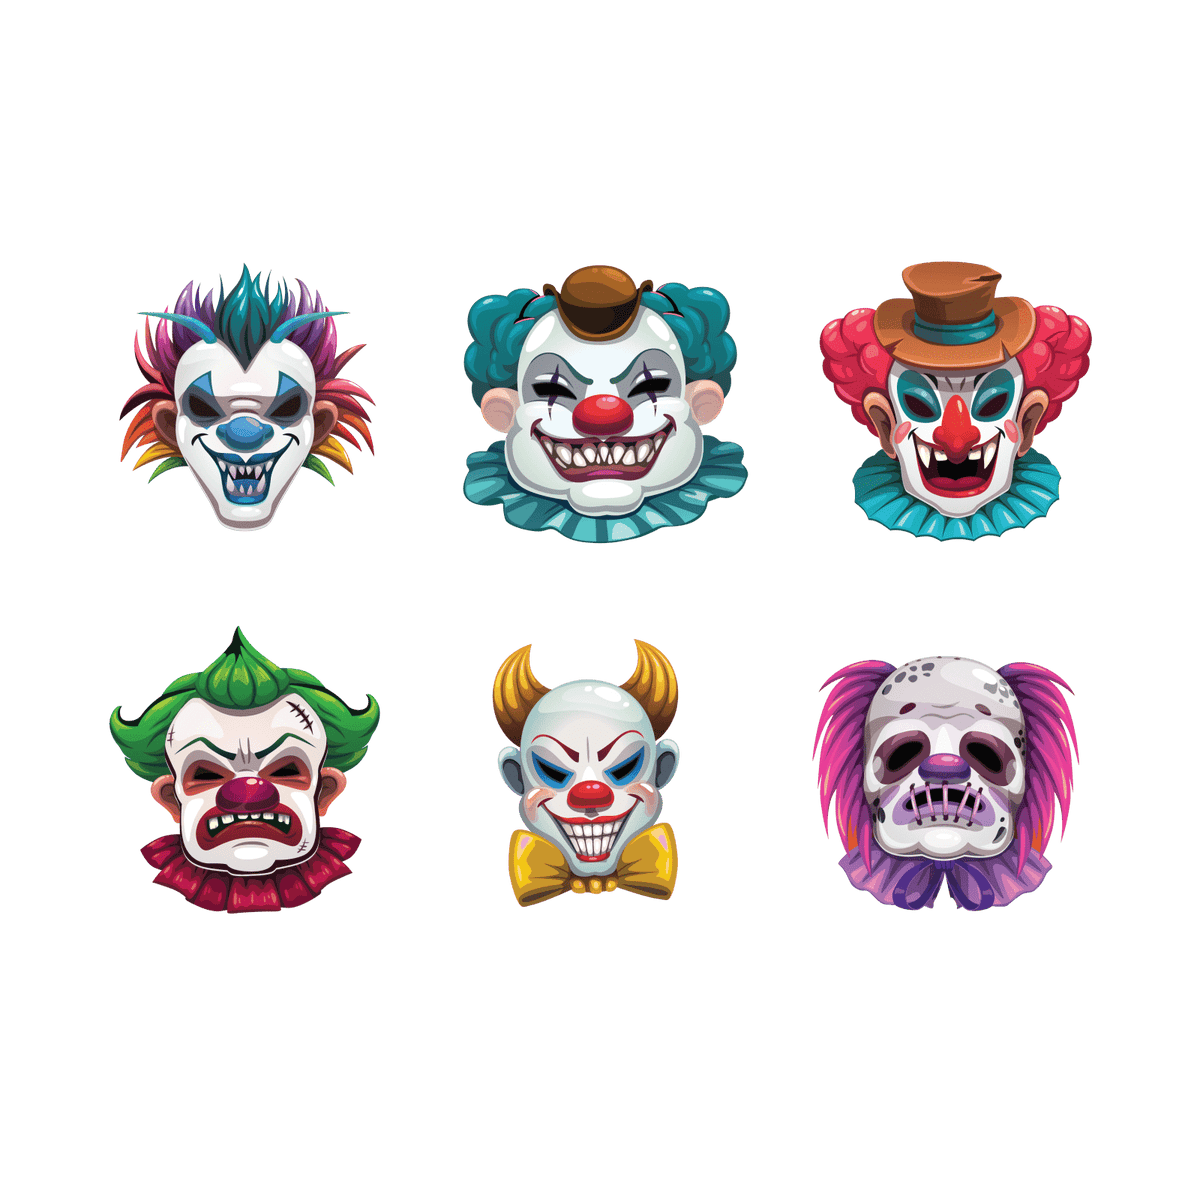 Six Scary Clowns life-sized cartoon clown faces with various expressions and colorful features displayed against a green background.